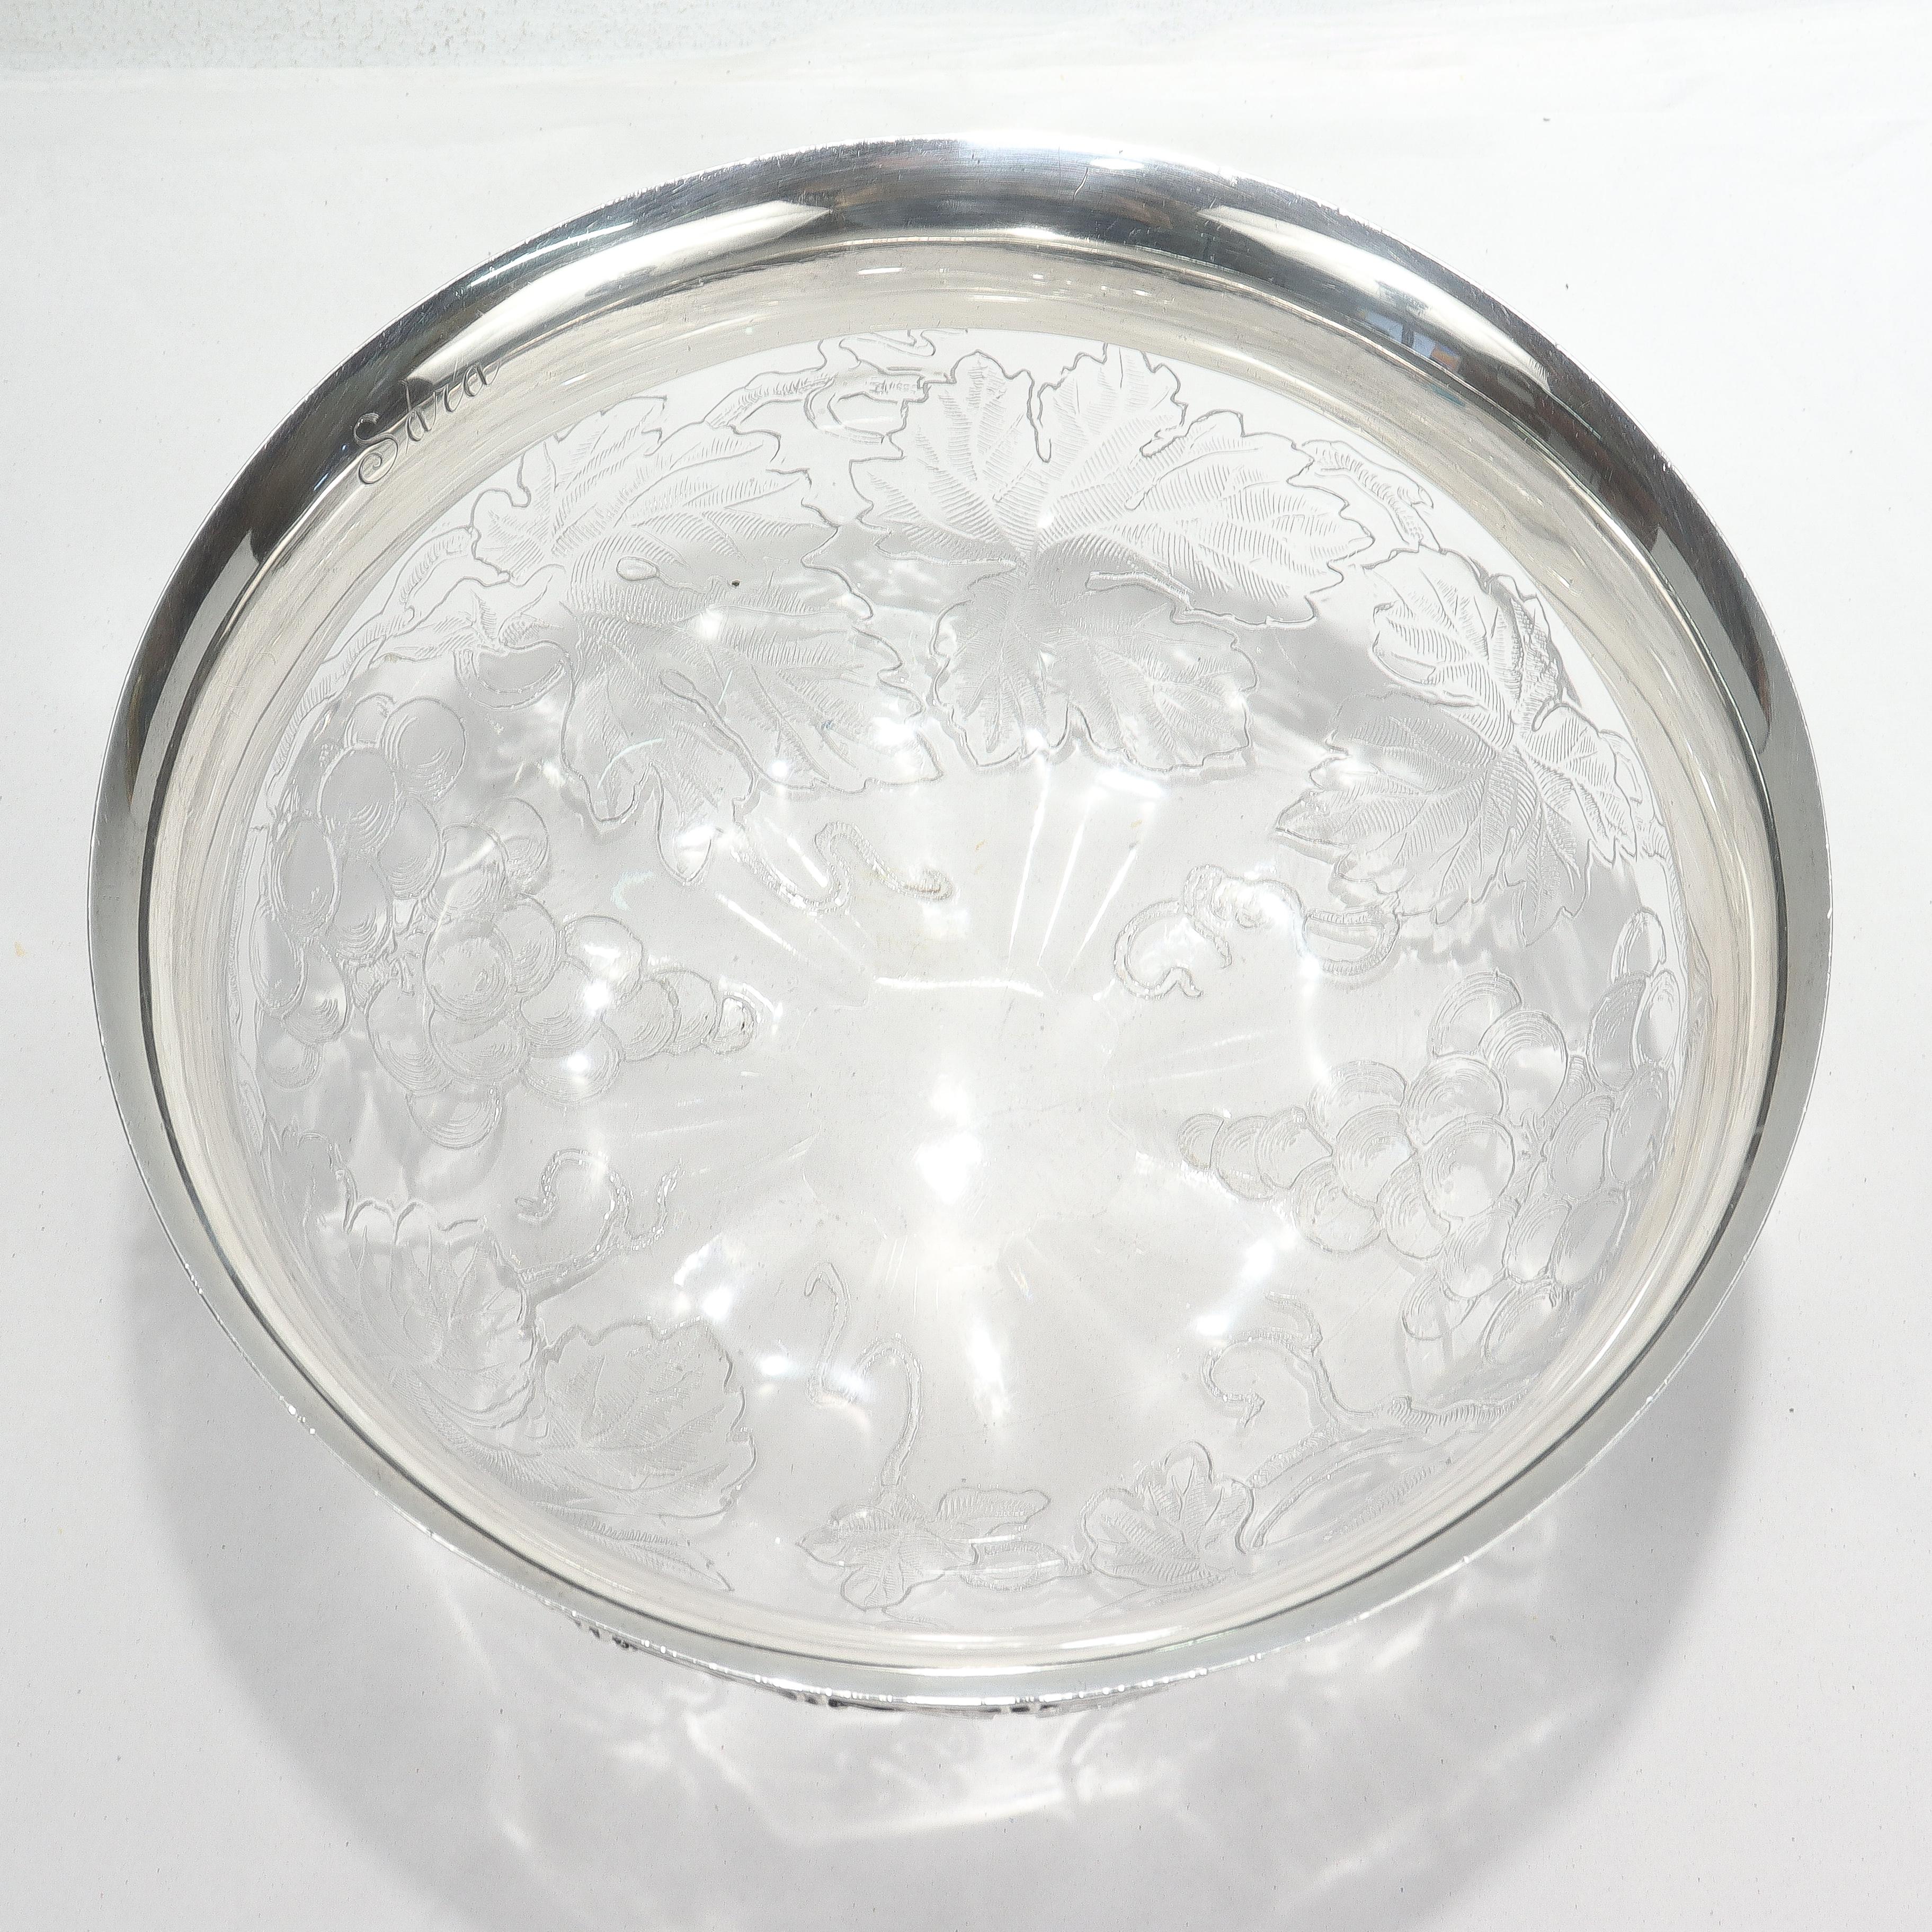 Antique Tiffany & Co. Sterling Silver Mounted 'Rock Crystal' Cut Glass Bowl 3